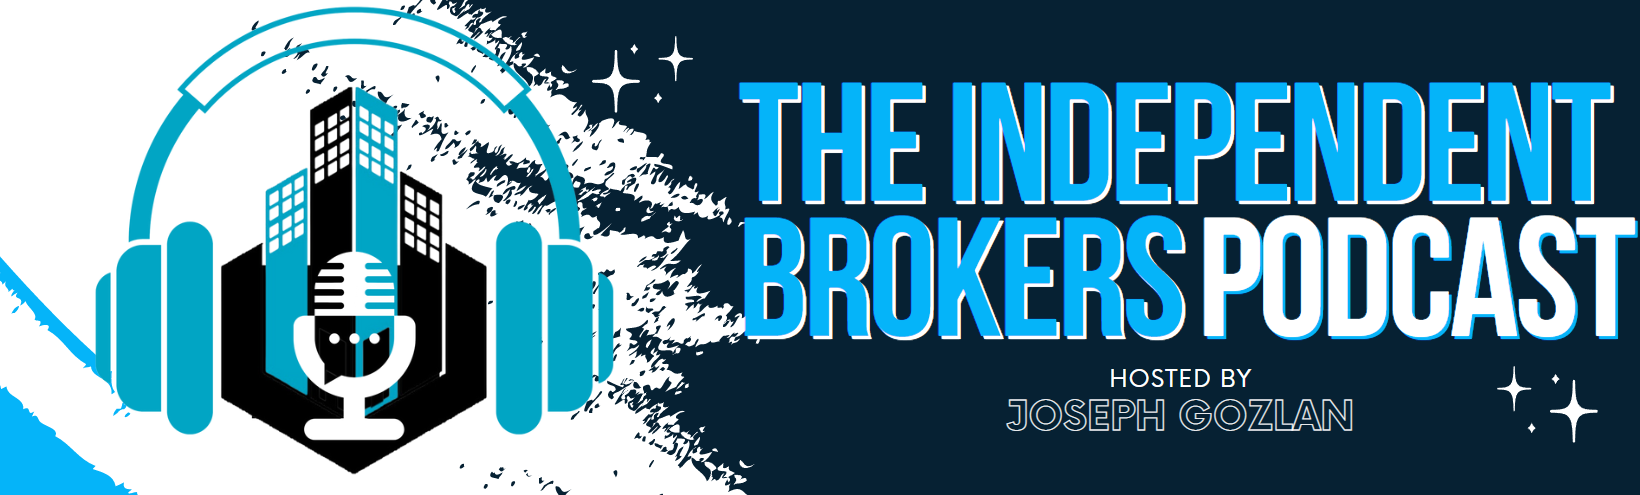 The Independent Broker Podcast